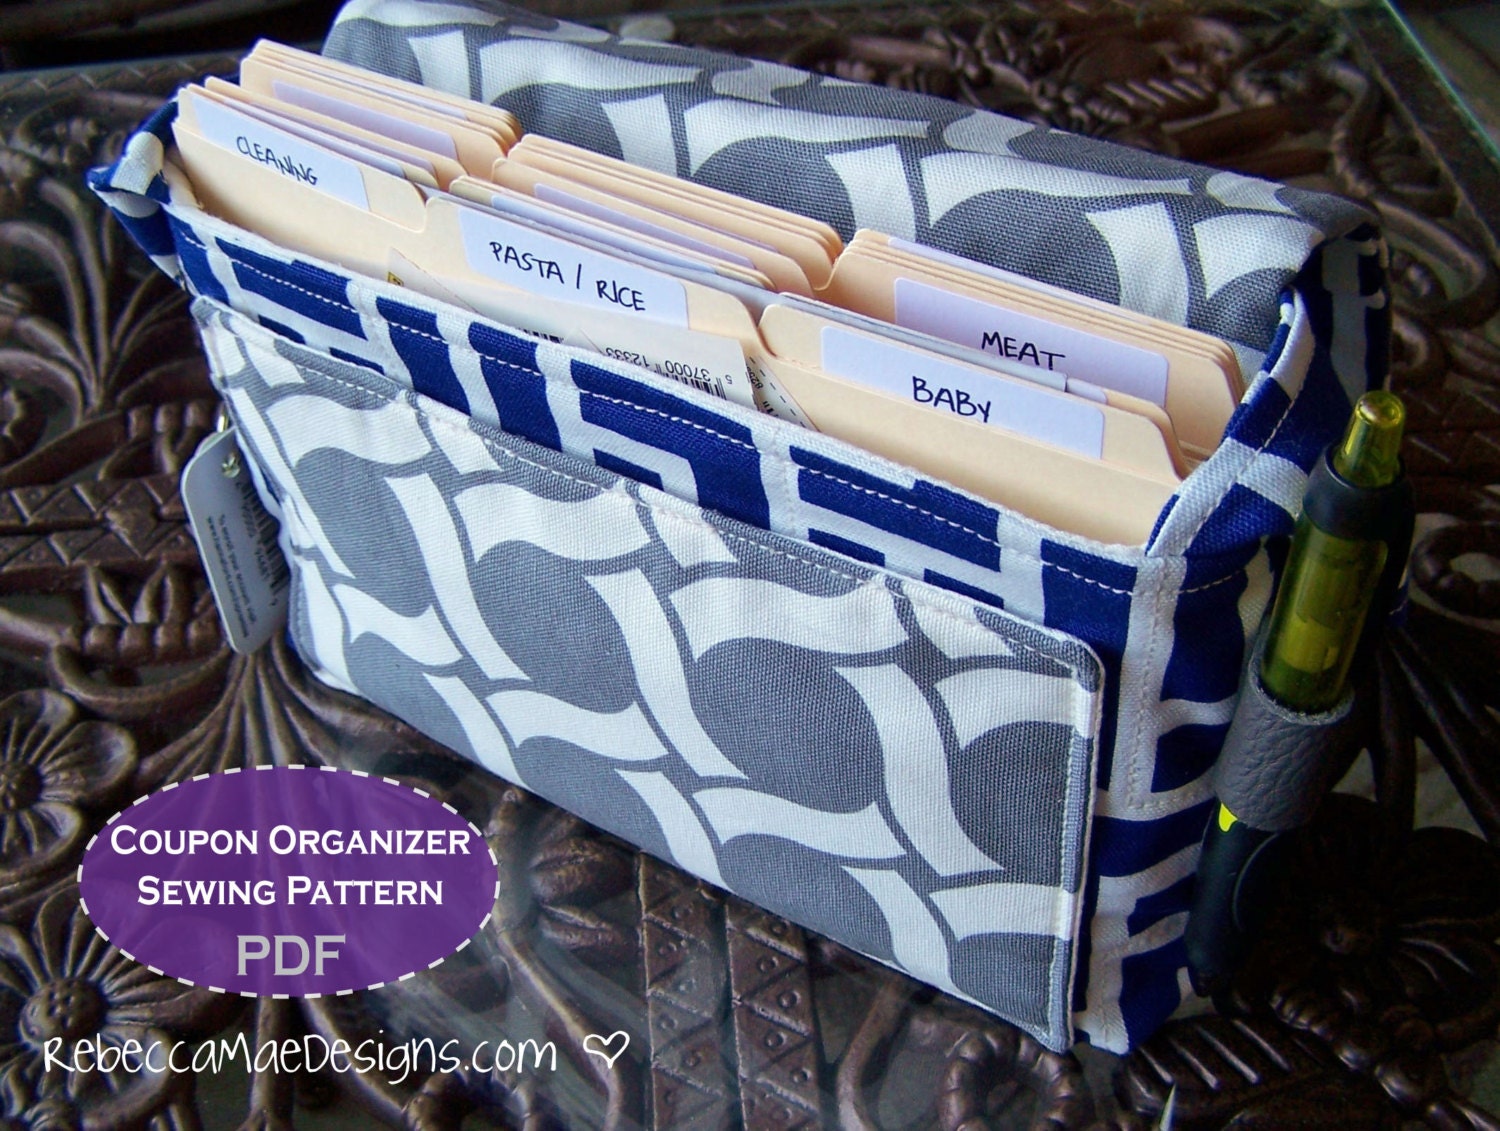 PATTERN Quilted Coupon Organizer DiY PDF sewing pattern for